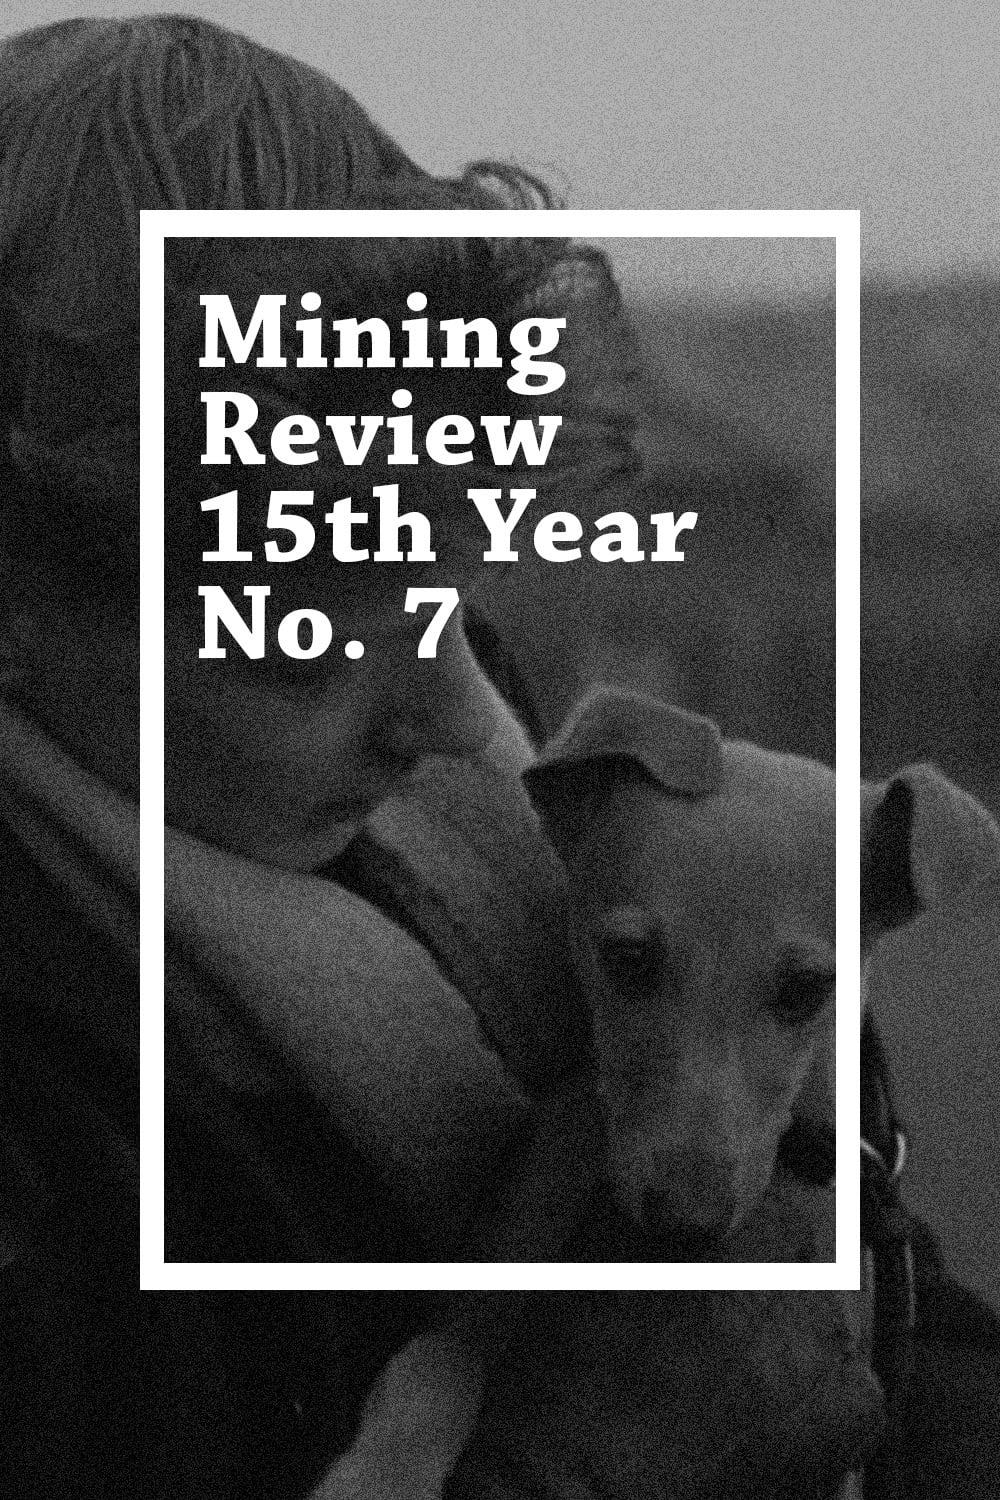 Mining Review 15th Year No. 7